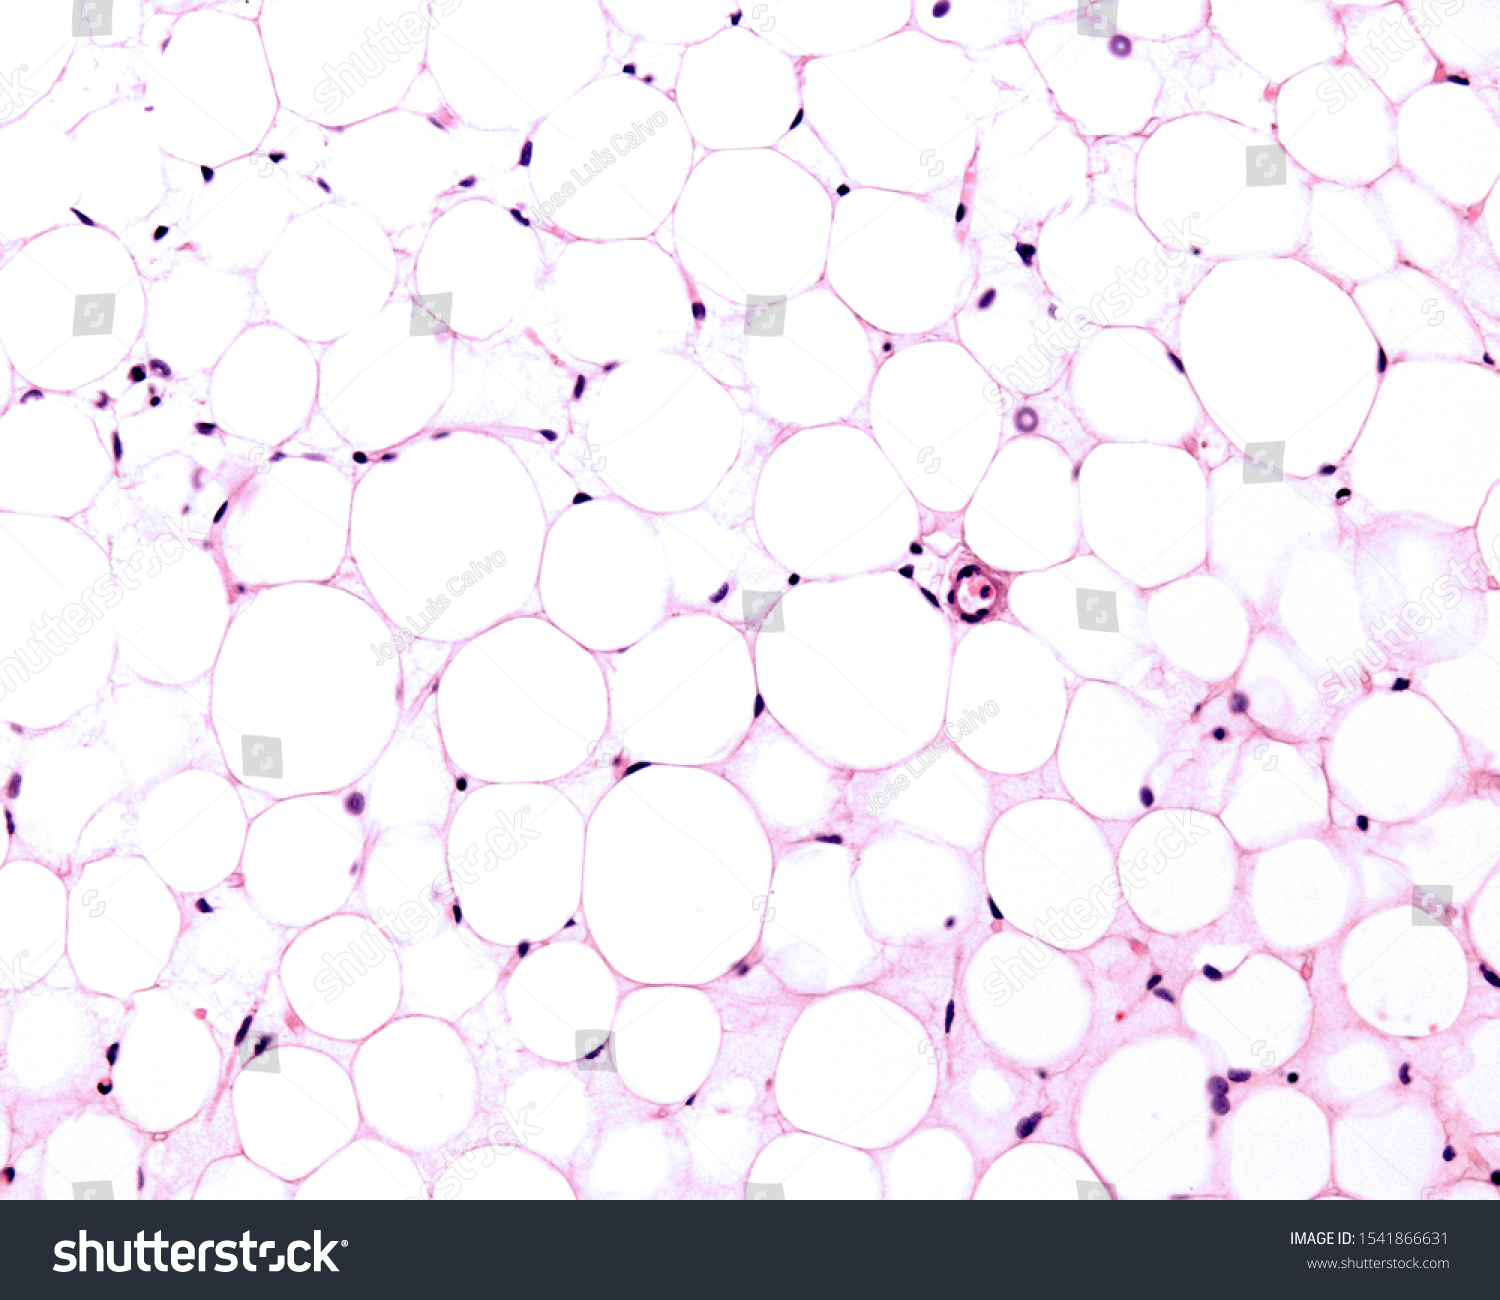 White adipose tissue stained with HE. Adipocytes (fat cells) contains a large lipid droplet surrounded by a thin layer of cytoplasm. The nucleus is flattened and located on the periphery #1541866631